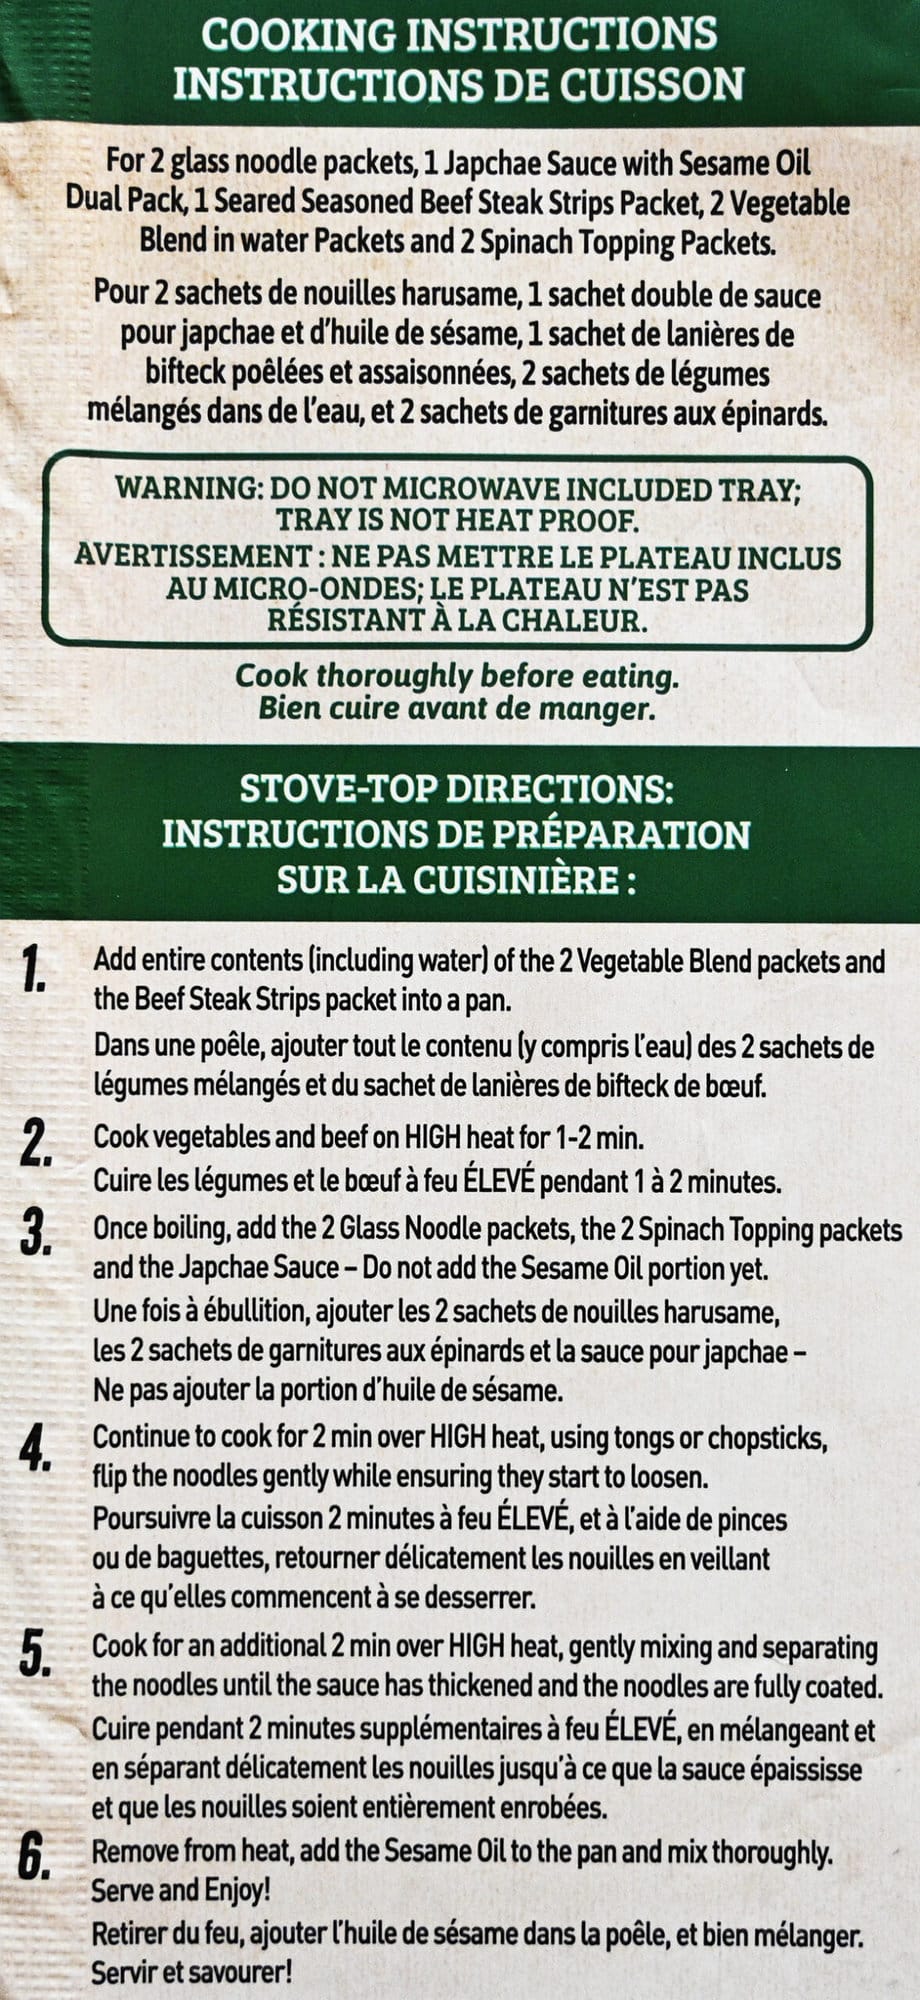 Image of the cooking instructions from the back of the package.